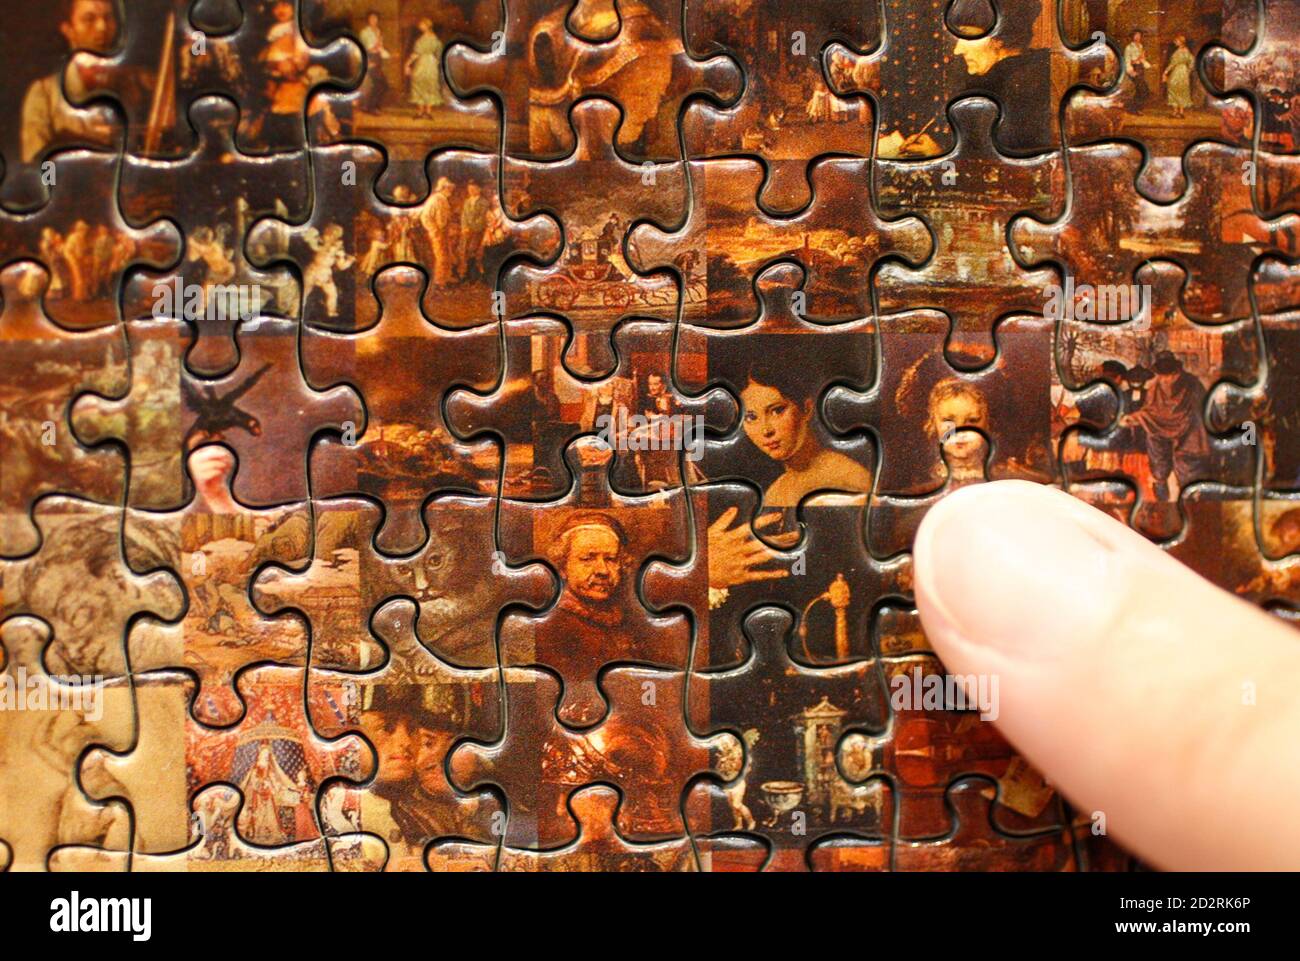 A staff of Japanese puzzle maker Beverly points at a piece of a new jigsaw  puzzle "Mona Lisa" displayed at the International Tokyo Toy Show 2009 in  Tokyo July 16, 2009. "Mona